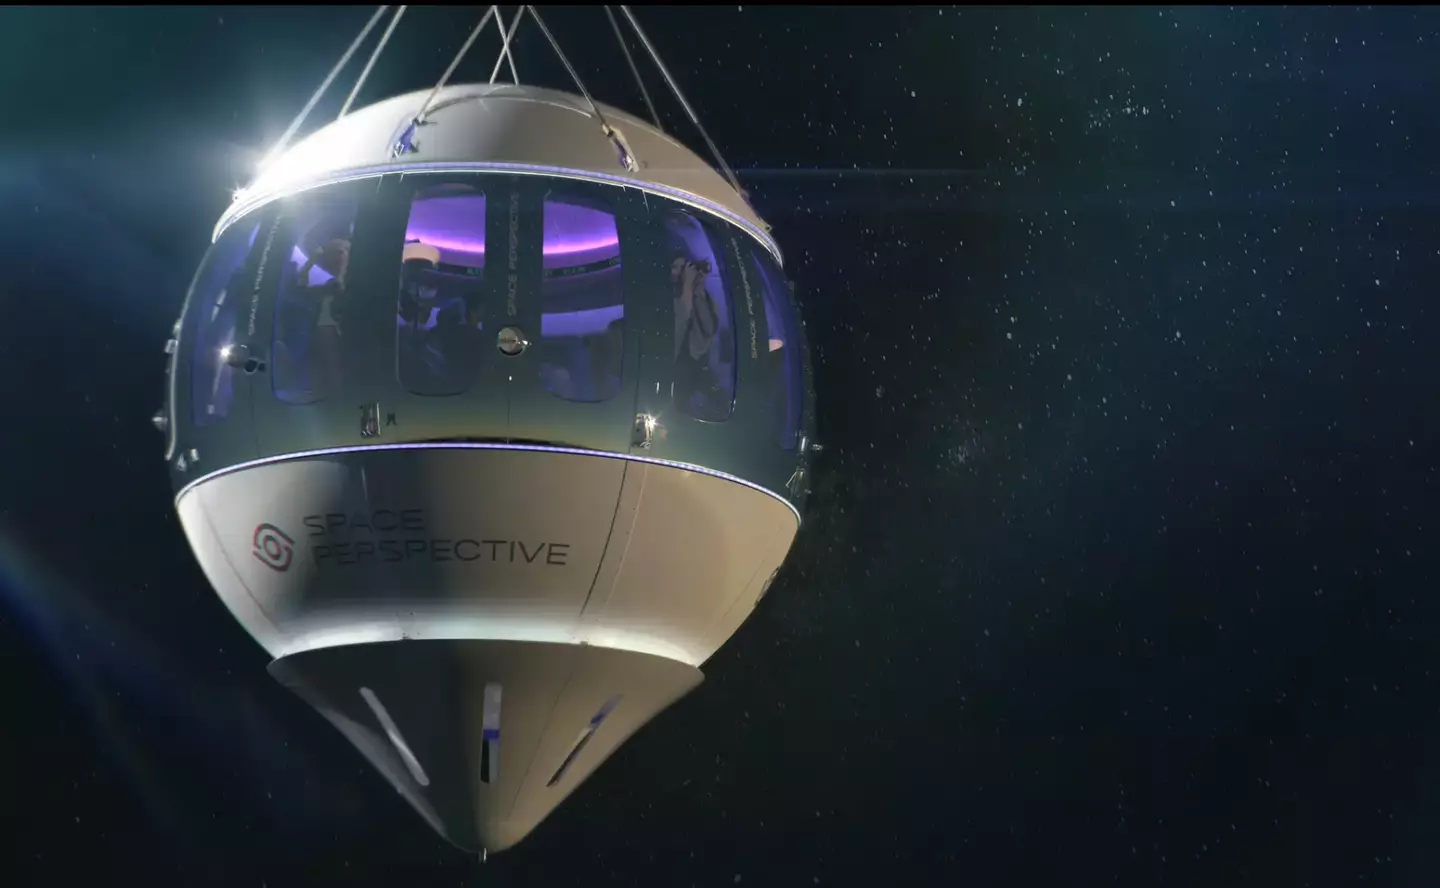 This elite dining experience will take eight people up into orbit using a space balloon.